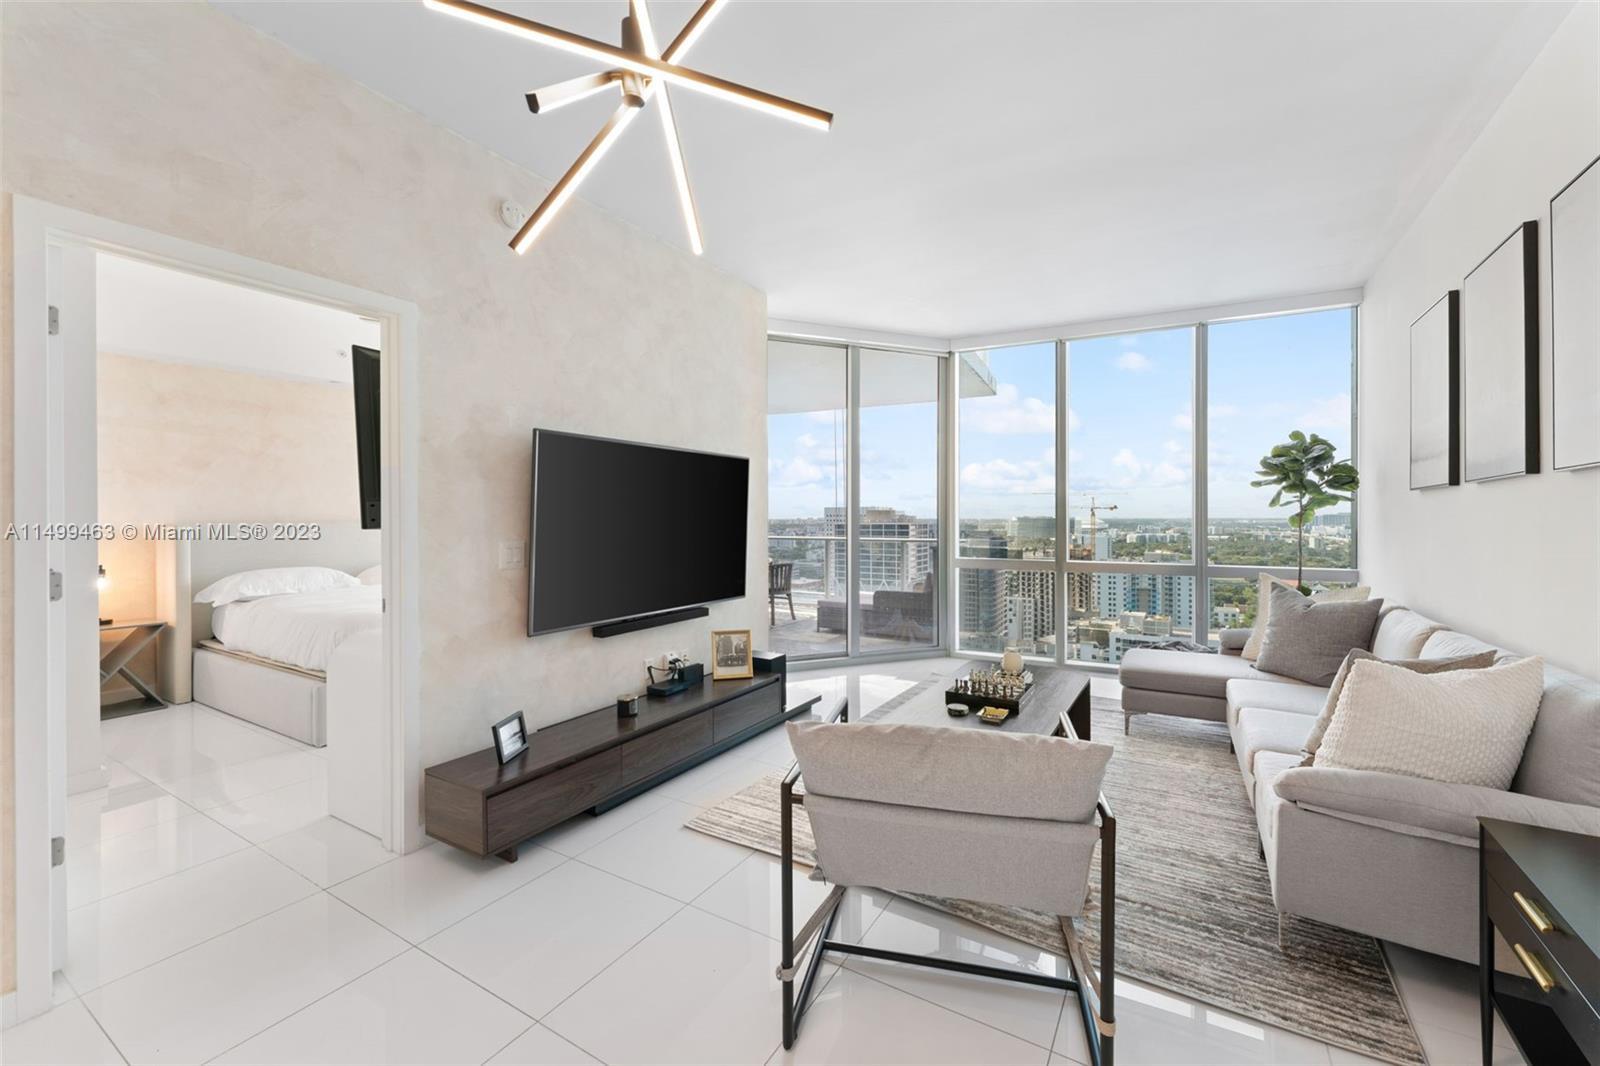 Experience elevated living at its finest in the highest 08’ line available at Paramount Miami World 